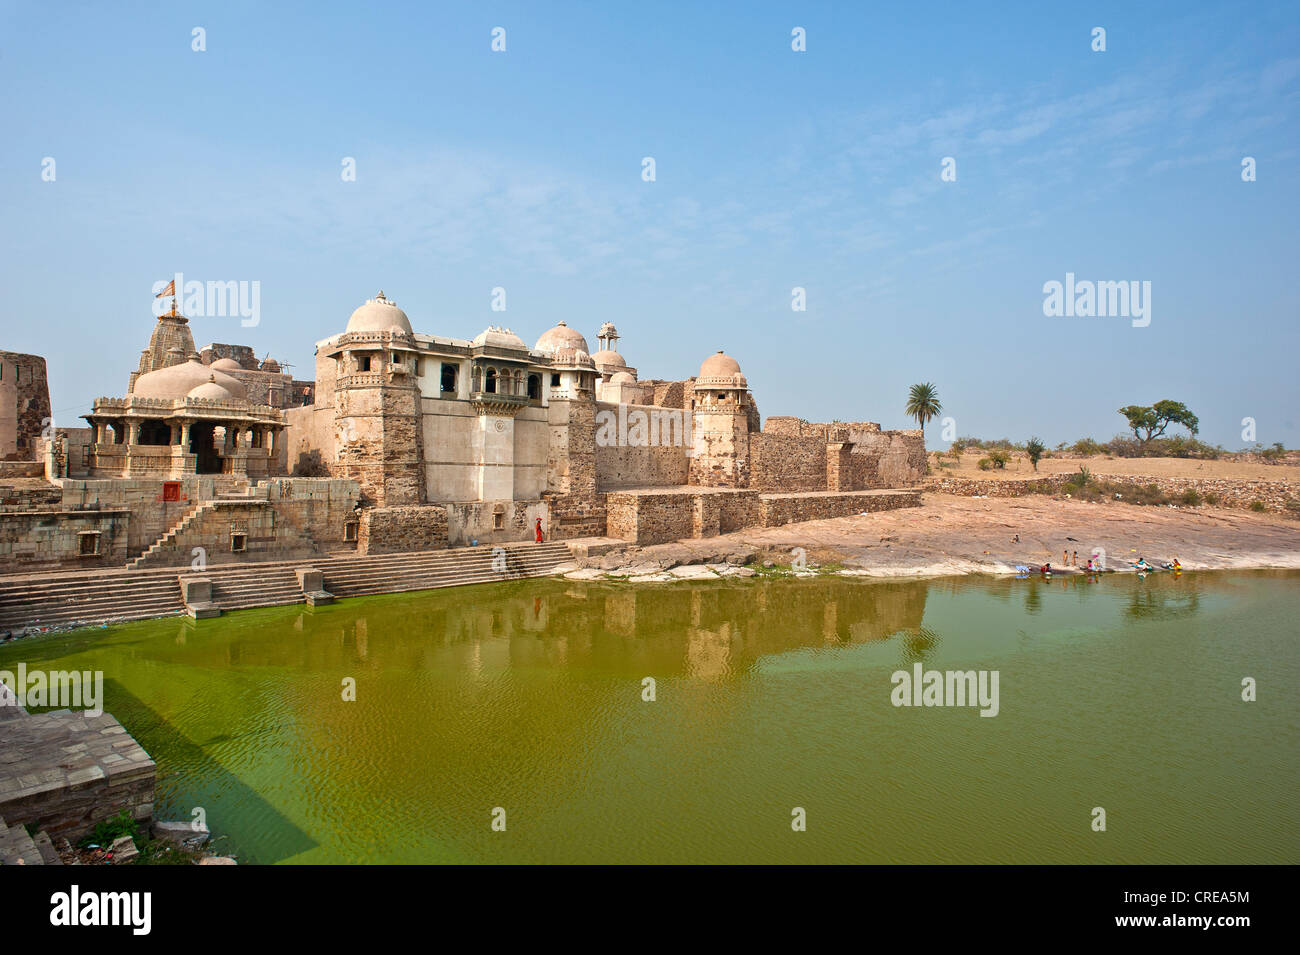 Ancient palace with an artificial lake, Chittorgarh Fort, Rajasthan, India, Asia Stock Photo